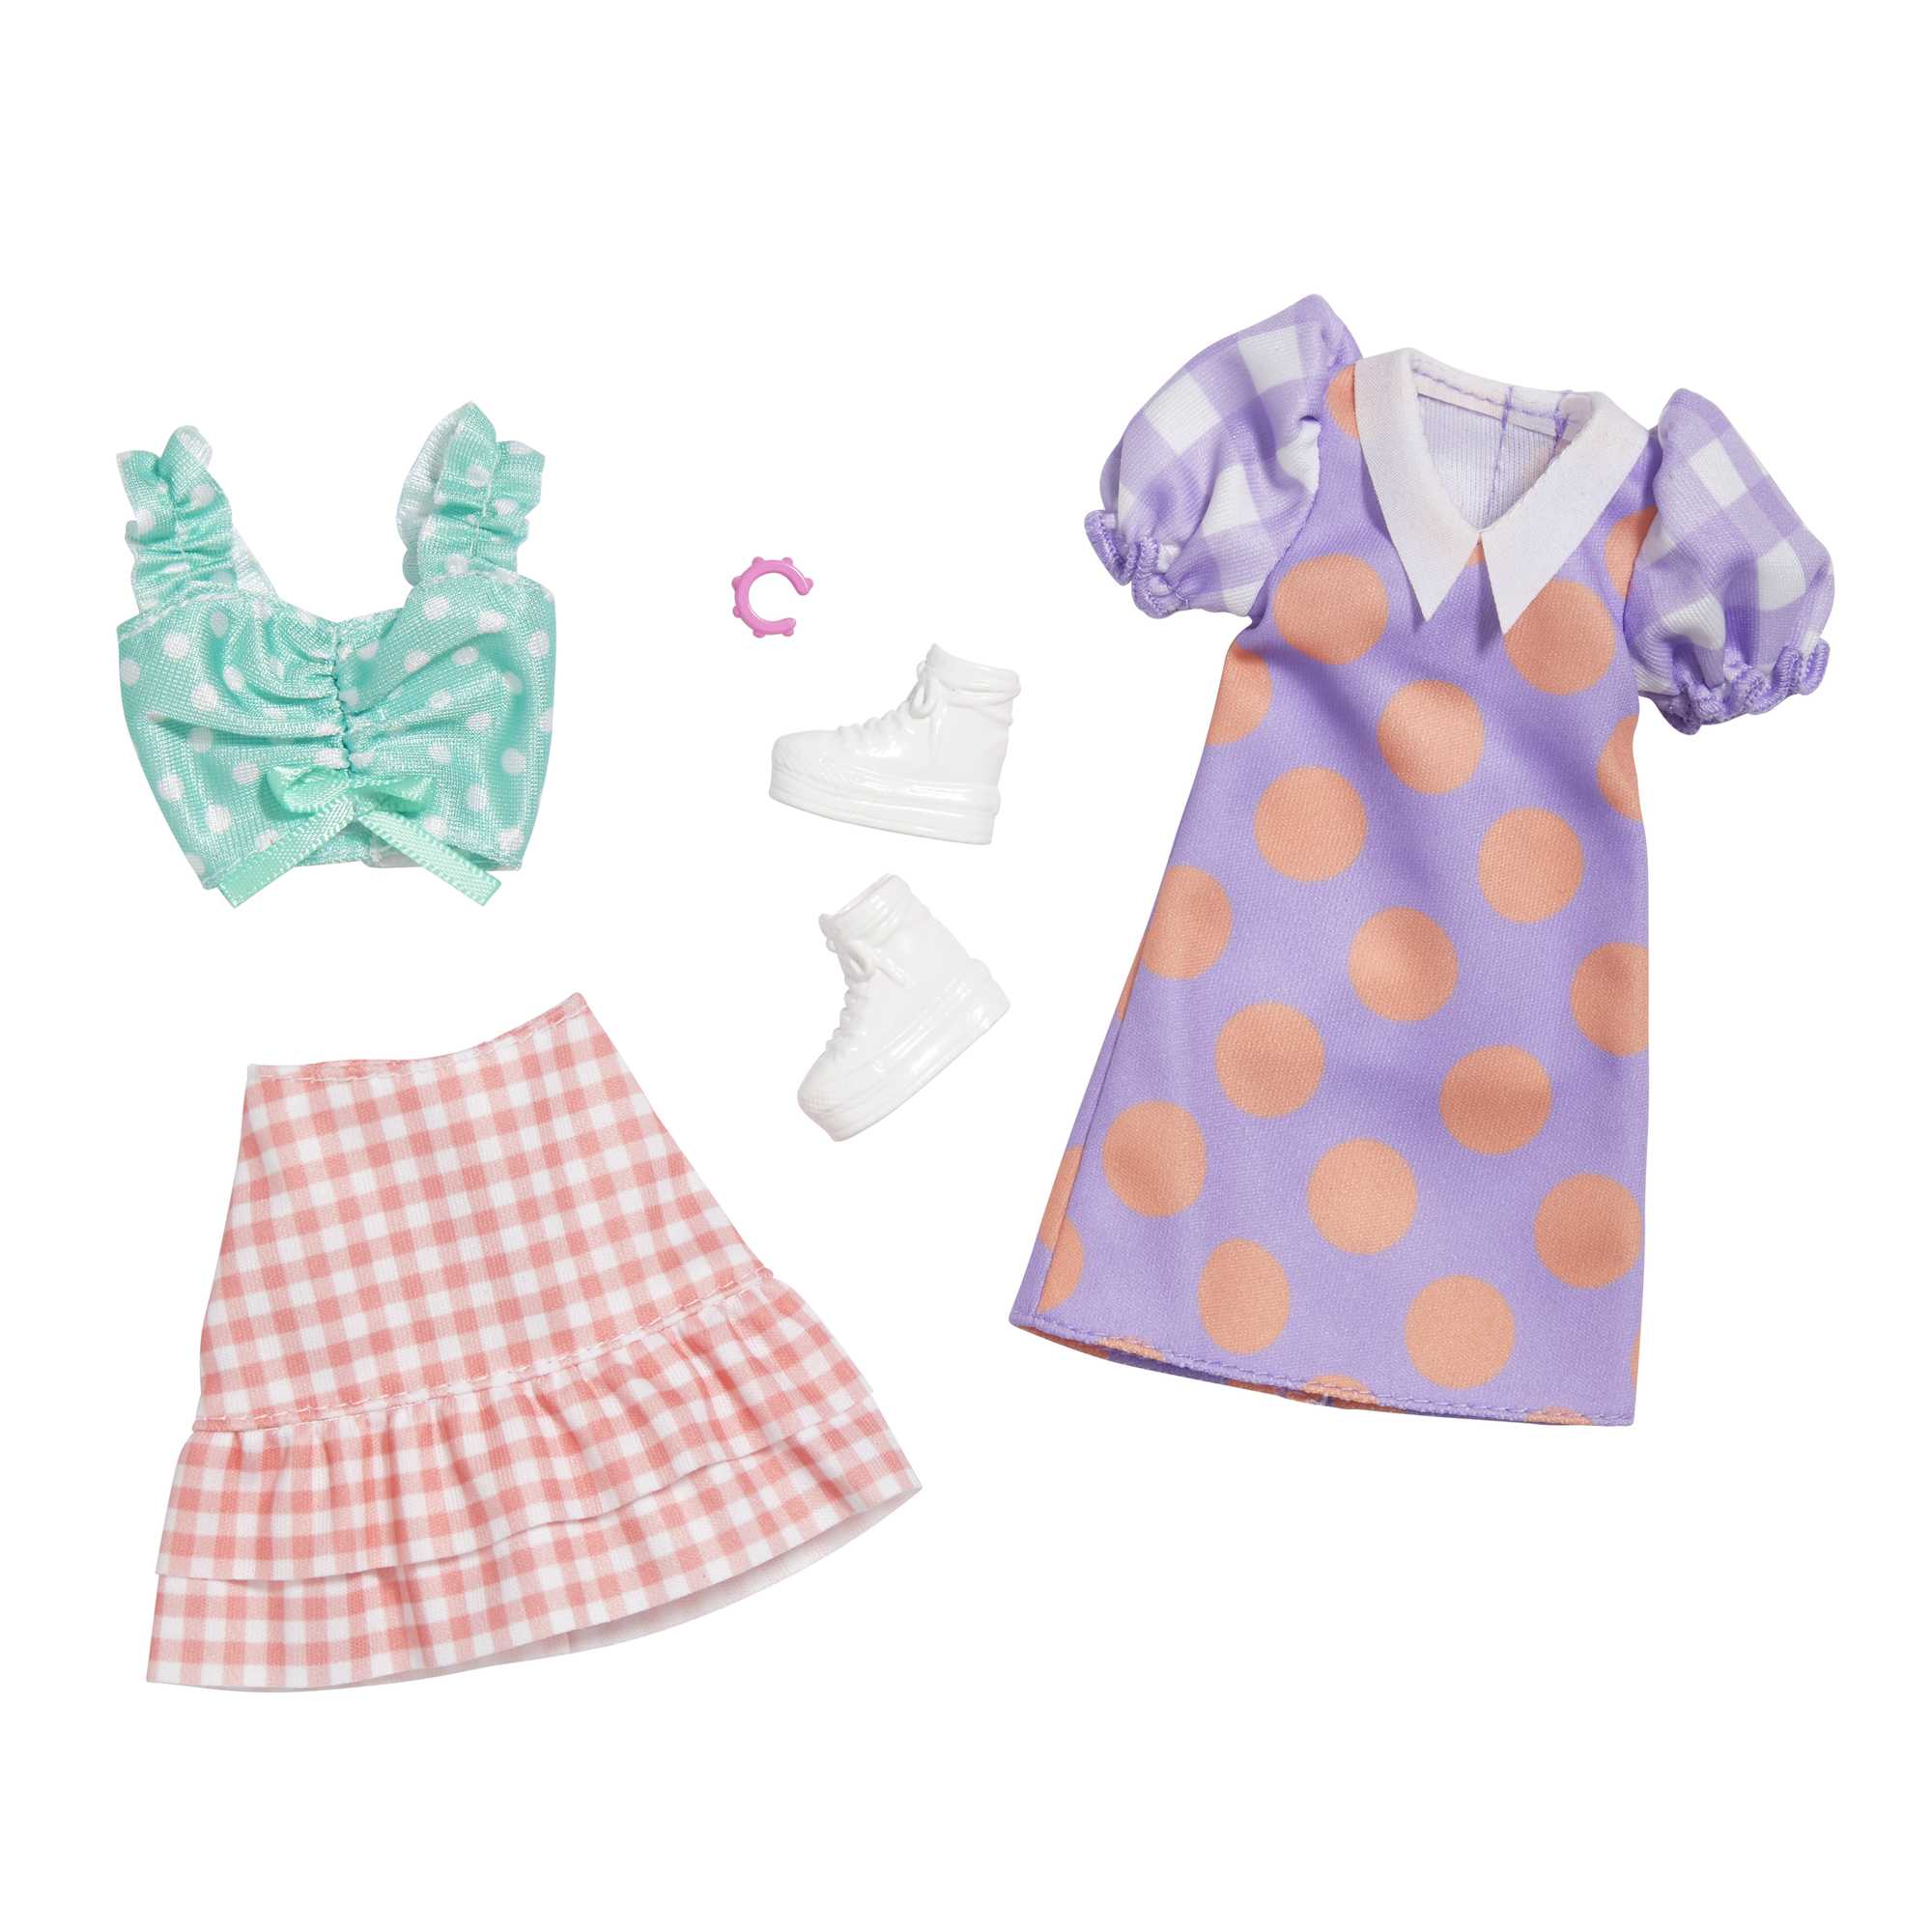 Barbie Clothes 2 Outfits & 2 Accessories For Barbie Doll